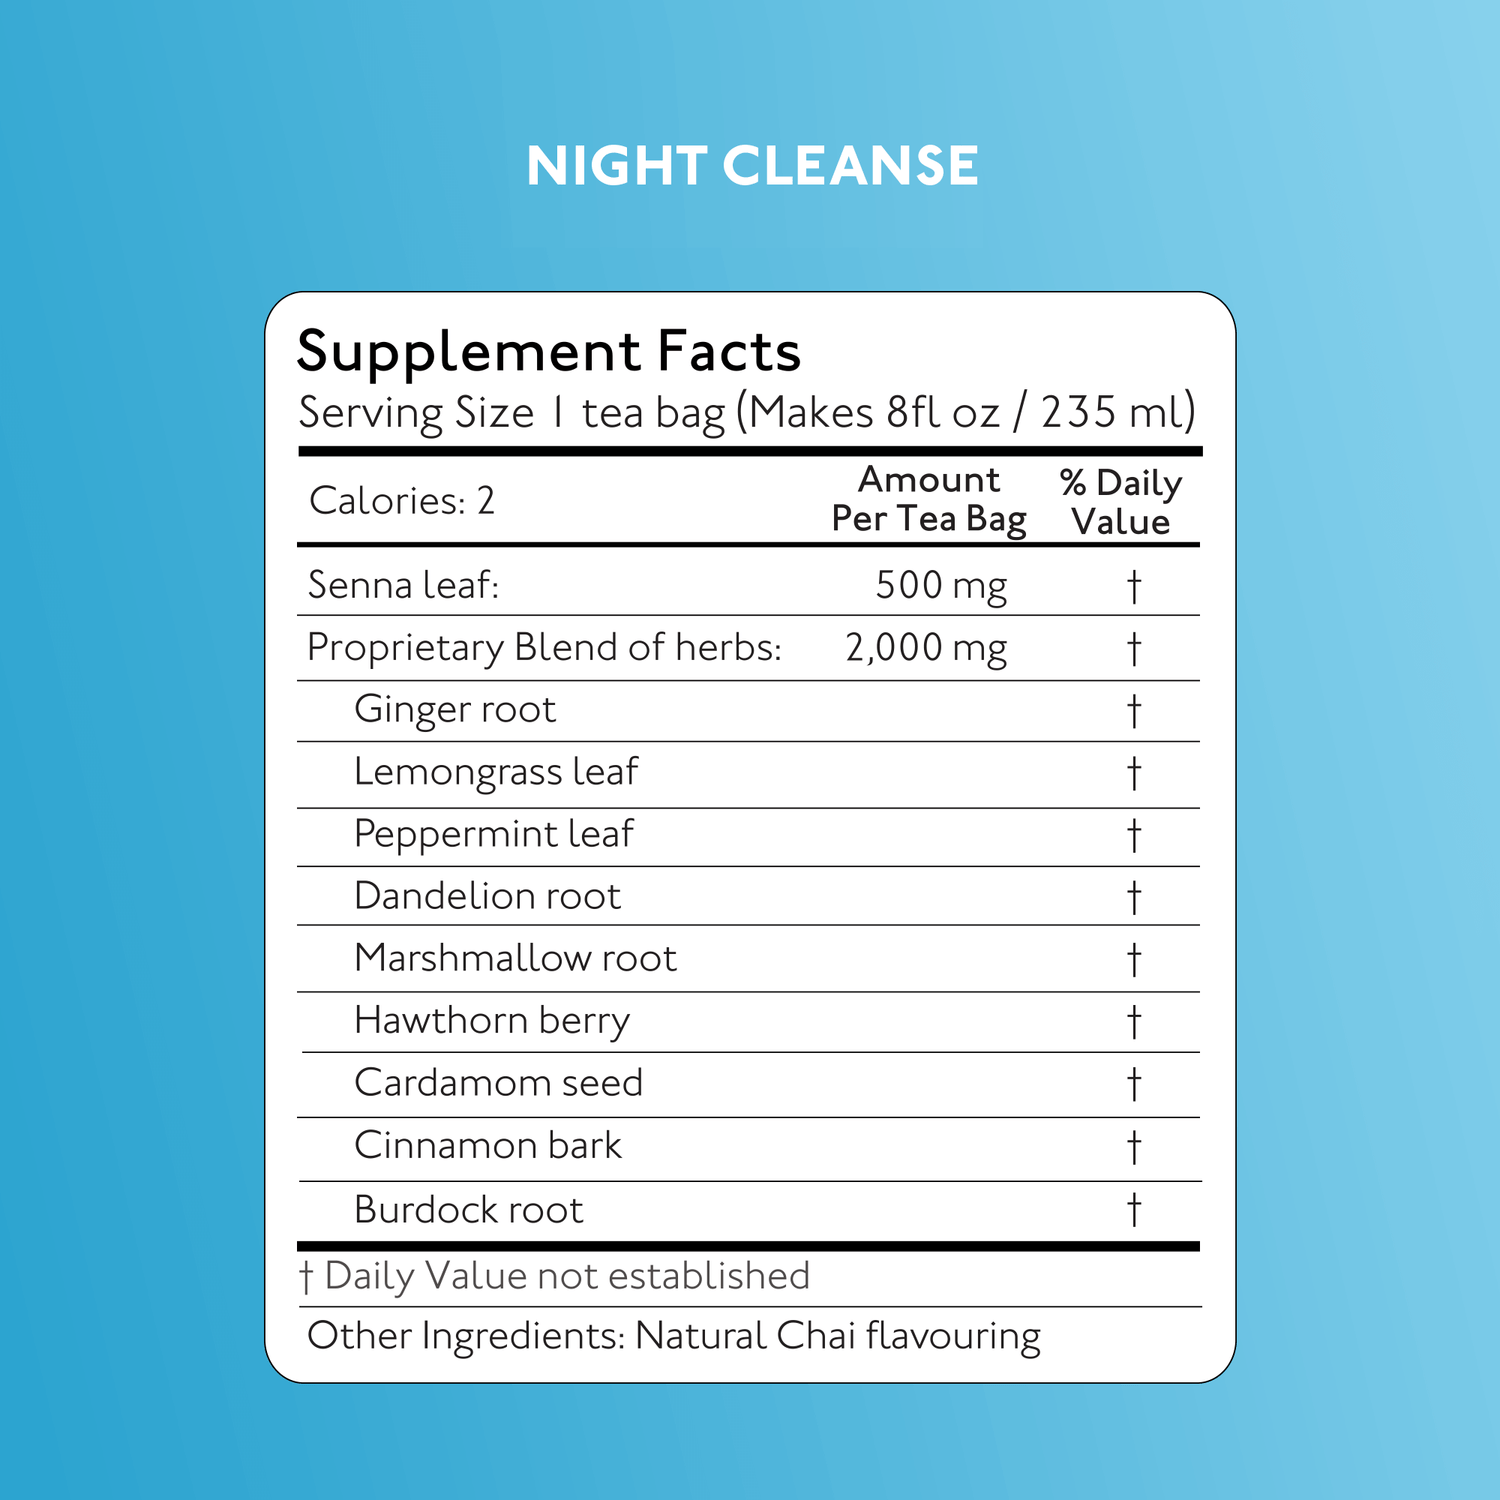 Night Cleanse Supplement Facts